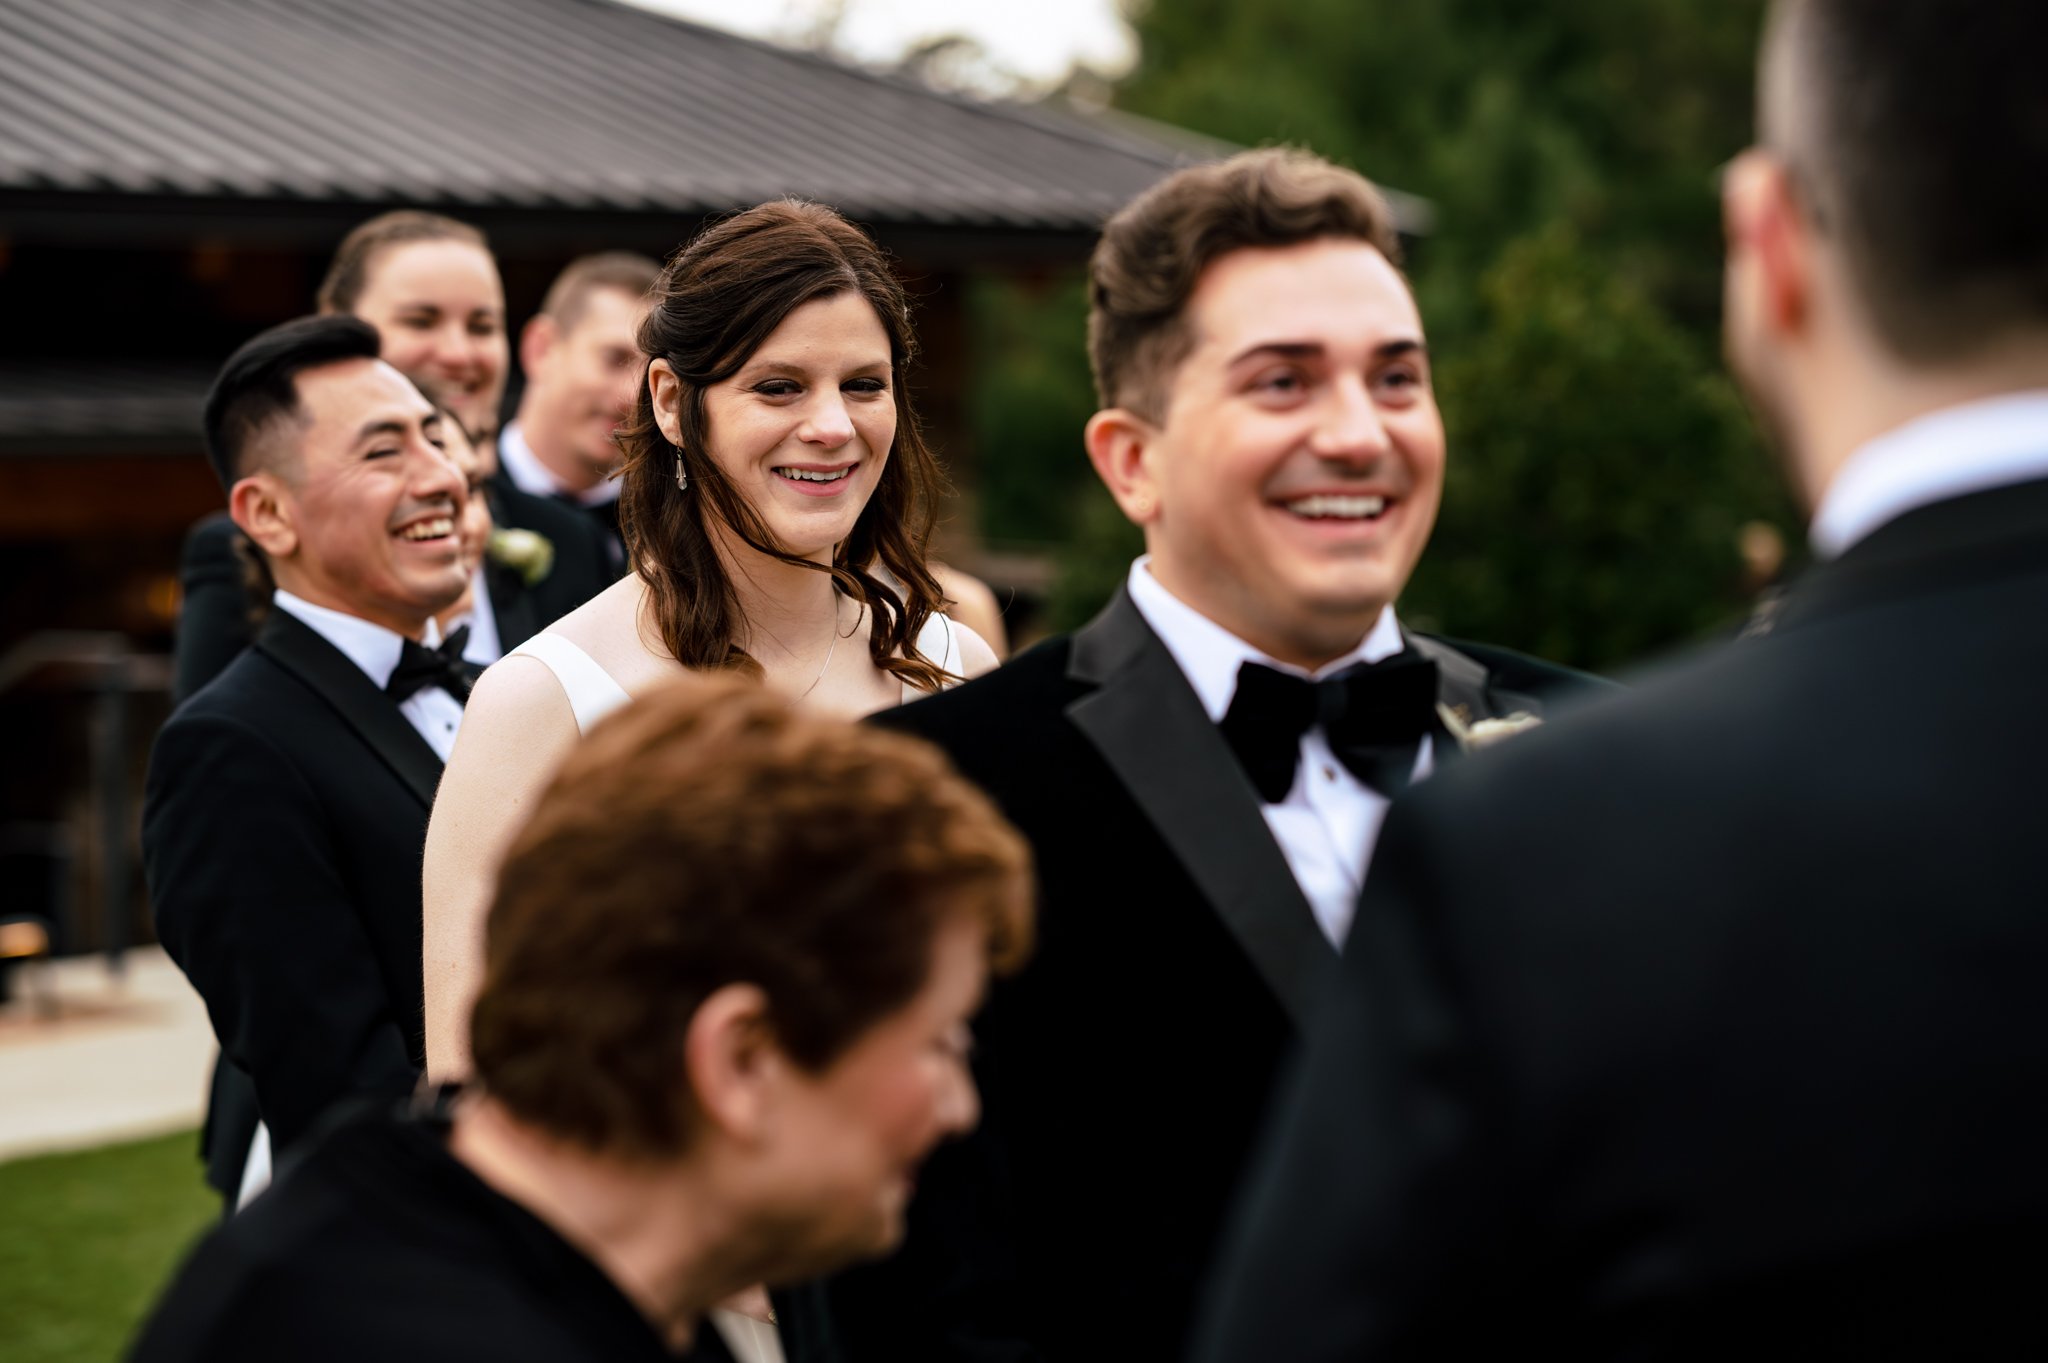 A bride and groom smile at each other as they walk down the Grove Park Inn wedding aisle.